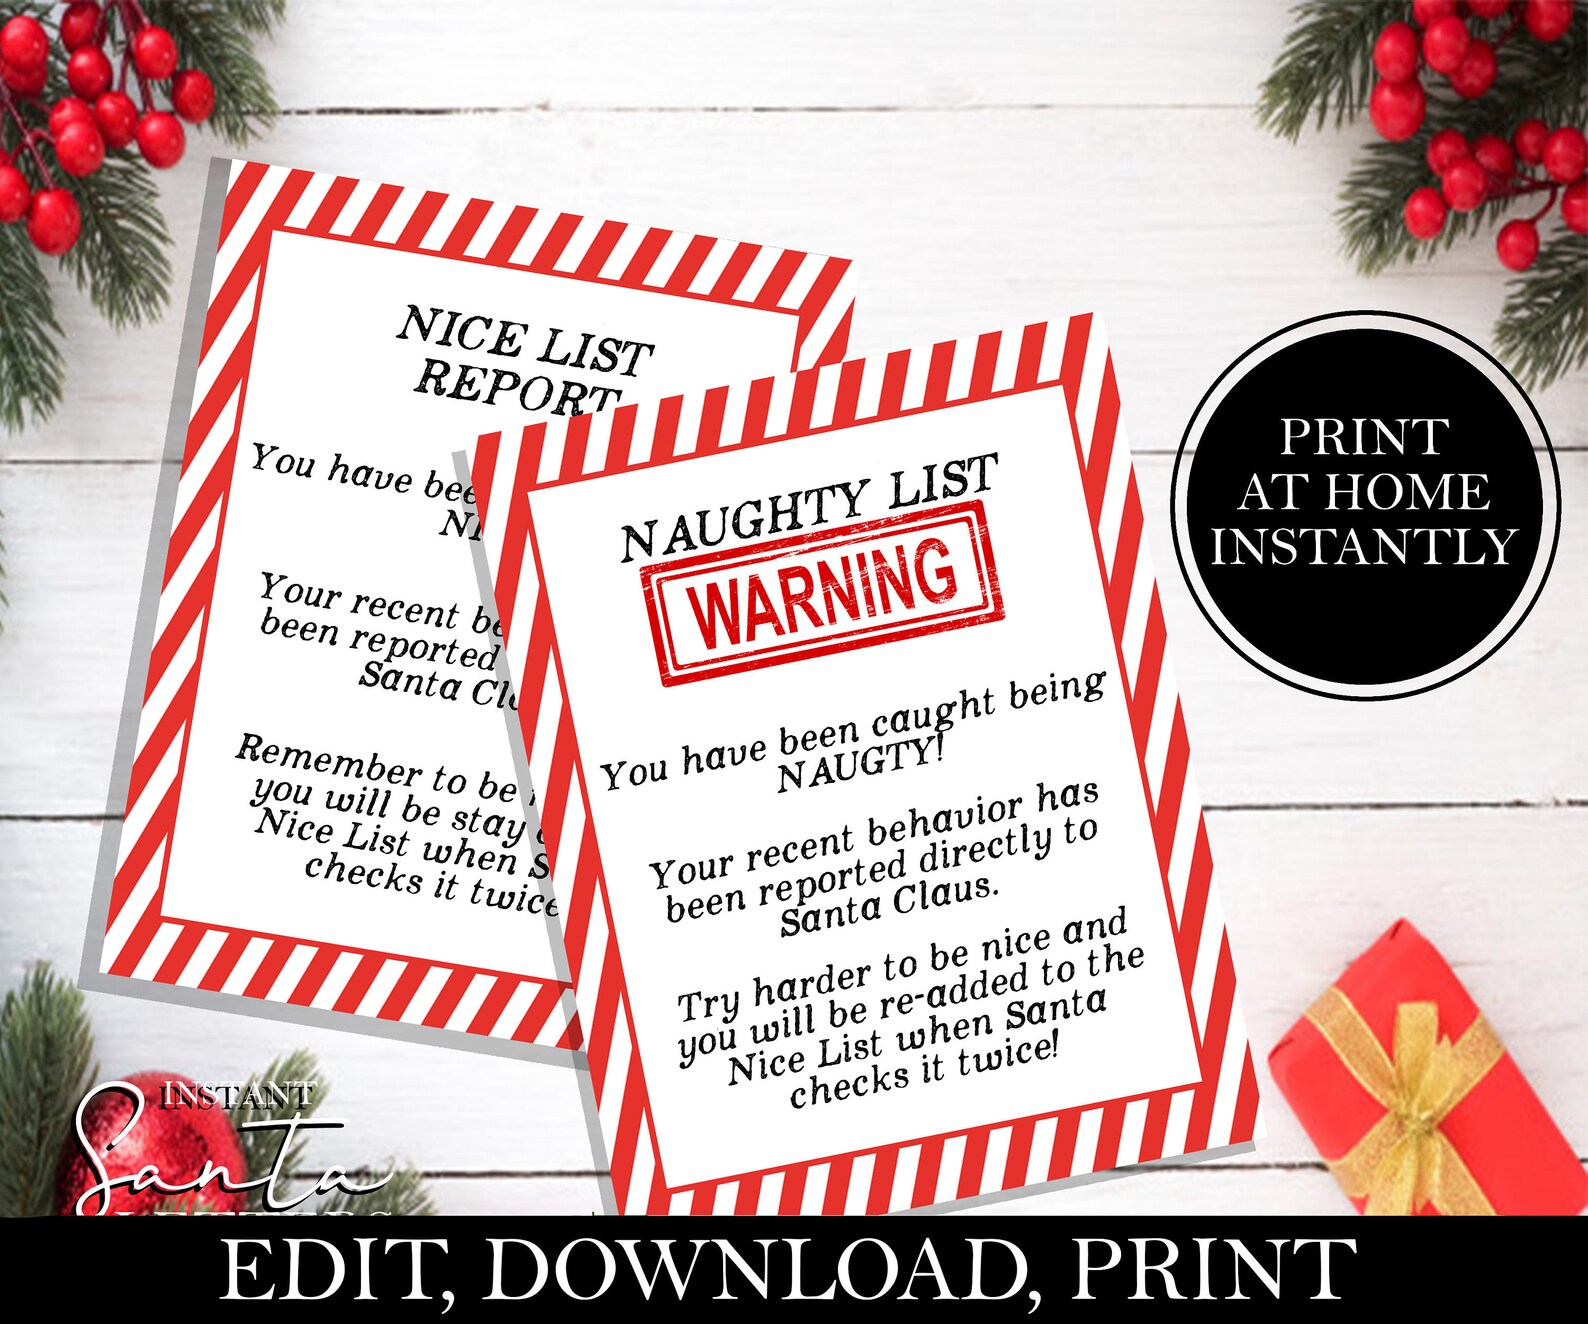 naughty-list-warning-letter-naughty-and-nice-list-letter-etsy